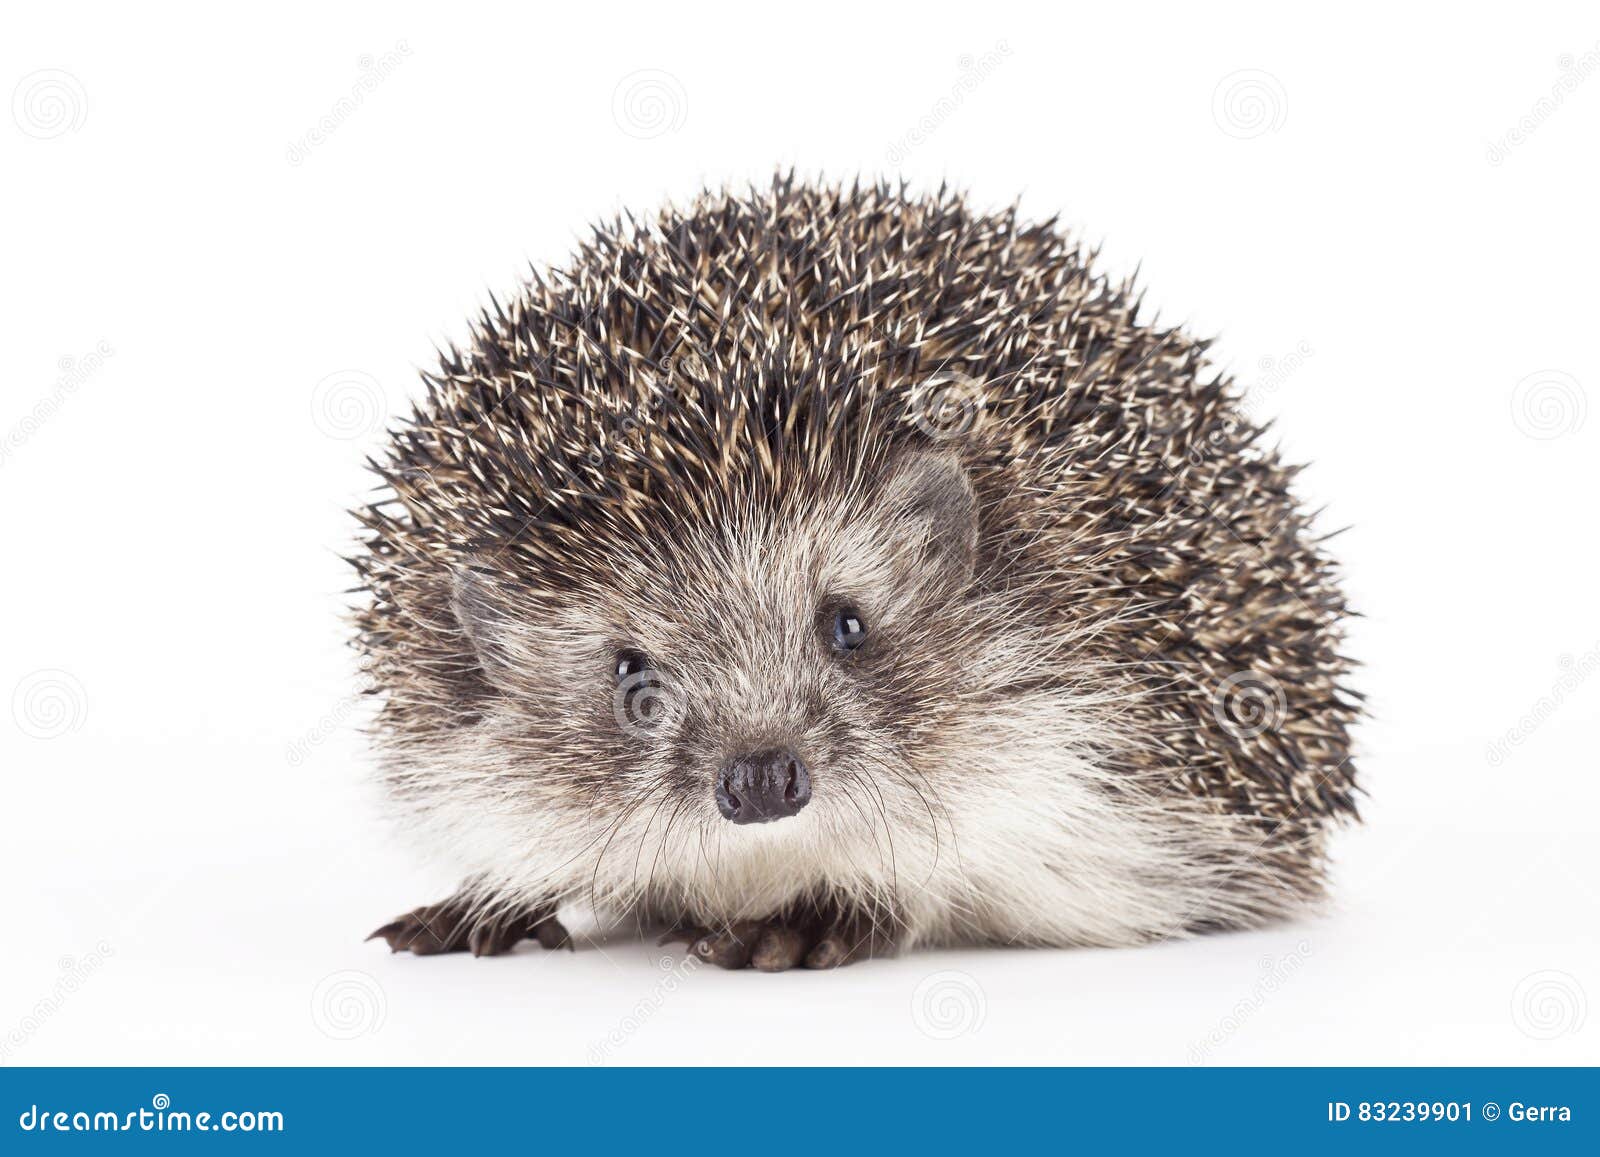 young hedgehog  background